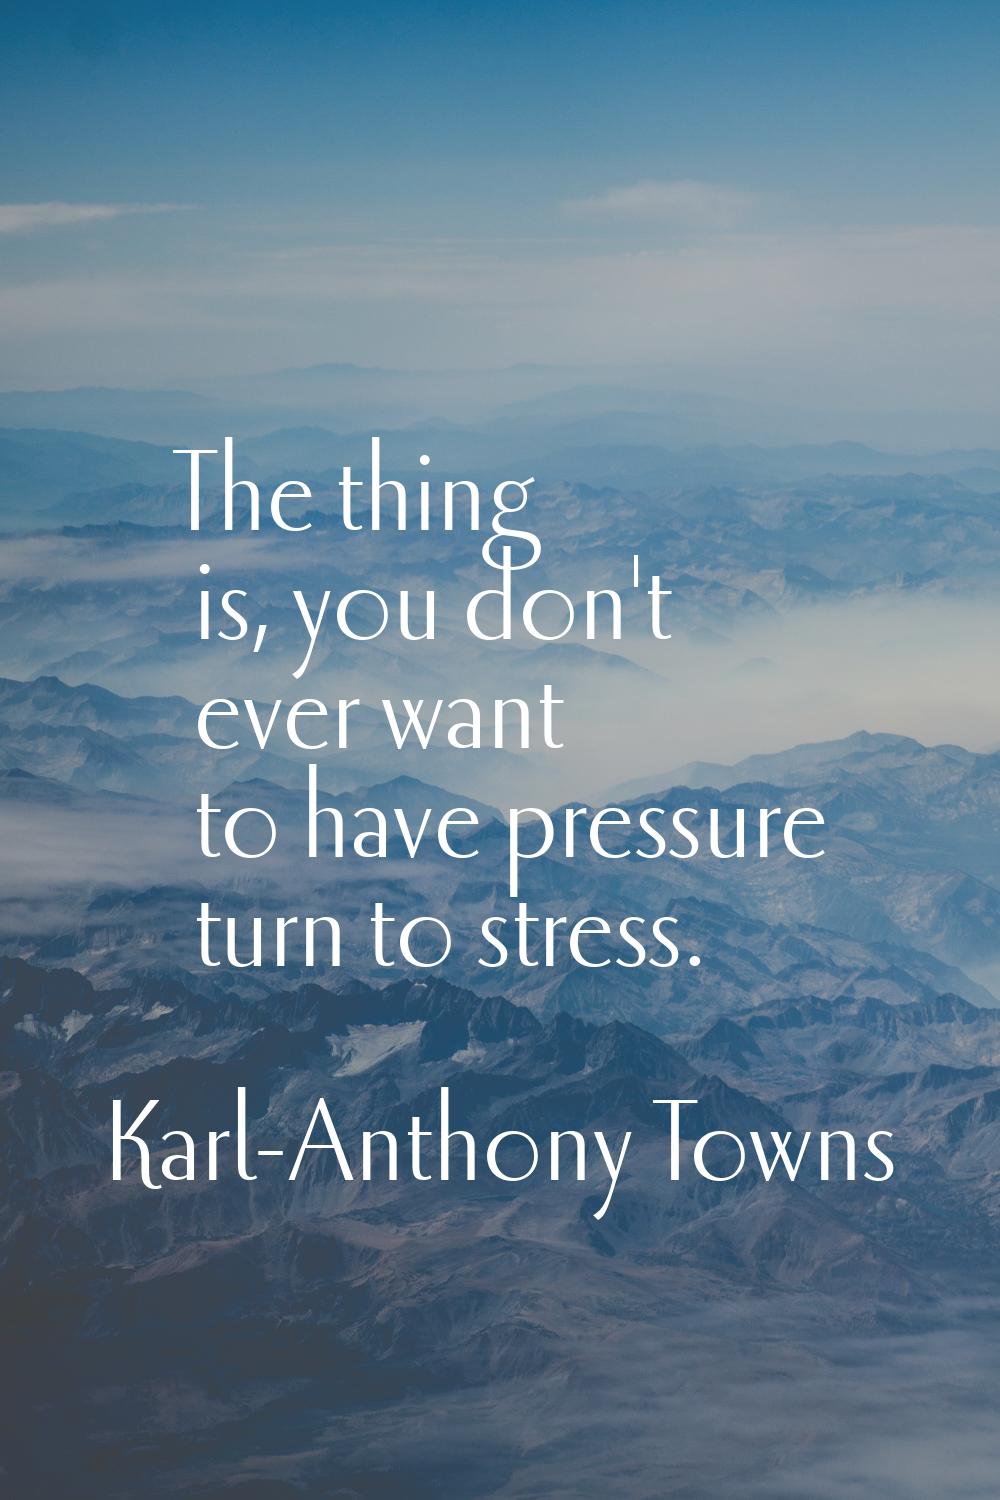 The thing is, you don't ever want to have pressure turn to stress.